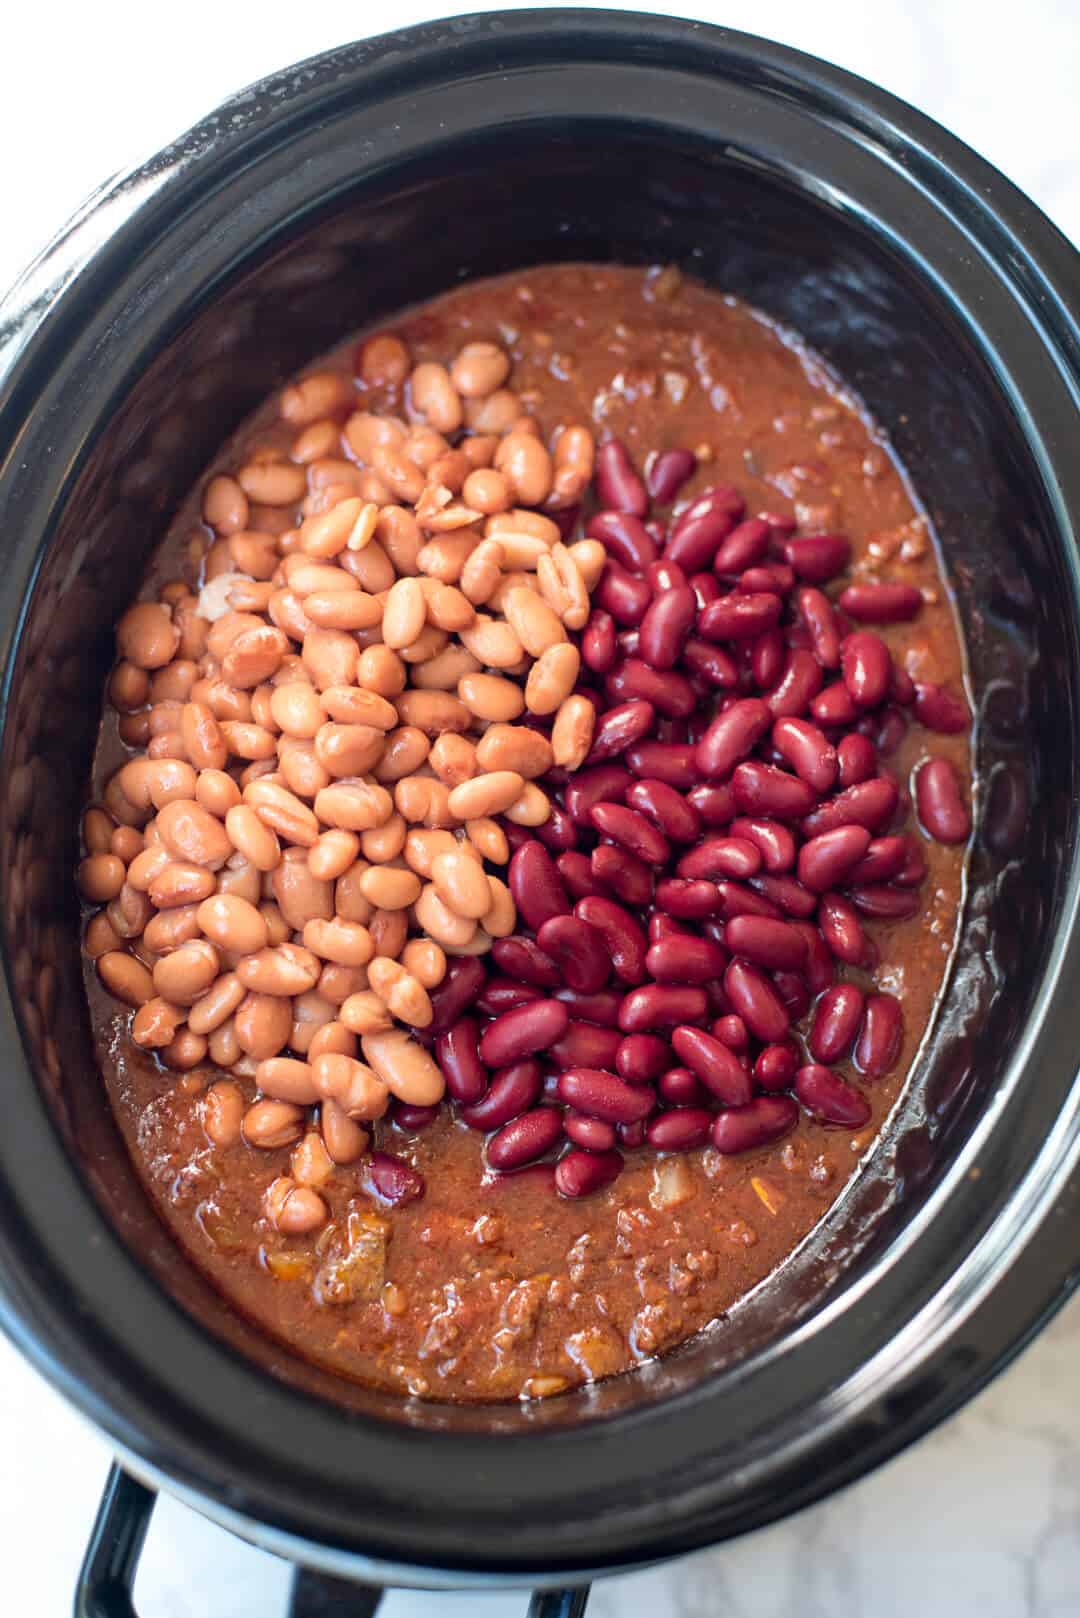 Pinto and kidney beans on top of a chili mixture in a slow cooker.